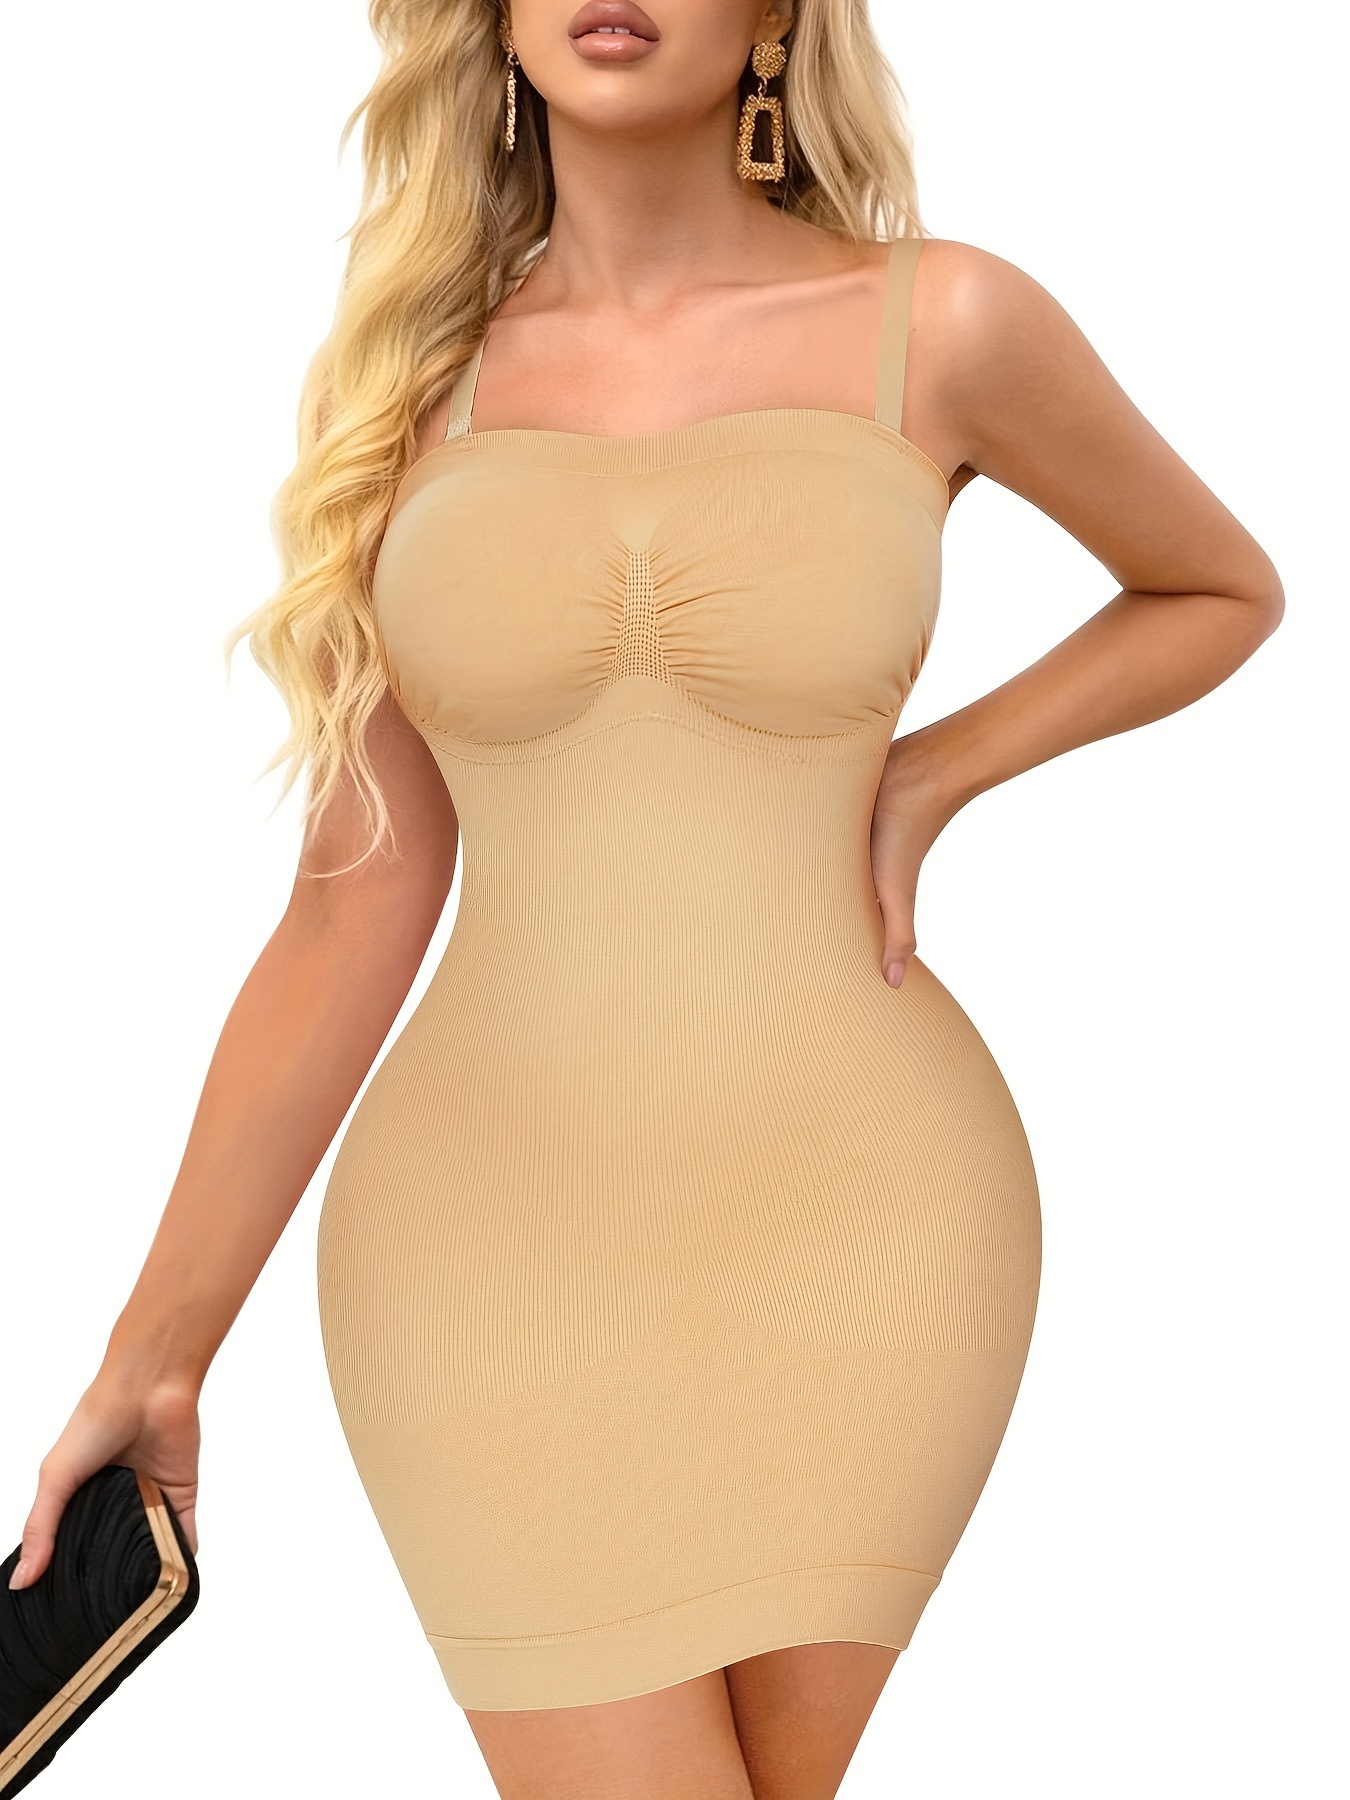 Seamless Shaping Strapless Dress Tummy Control Slimming Body